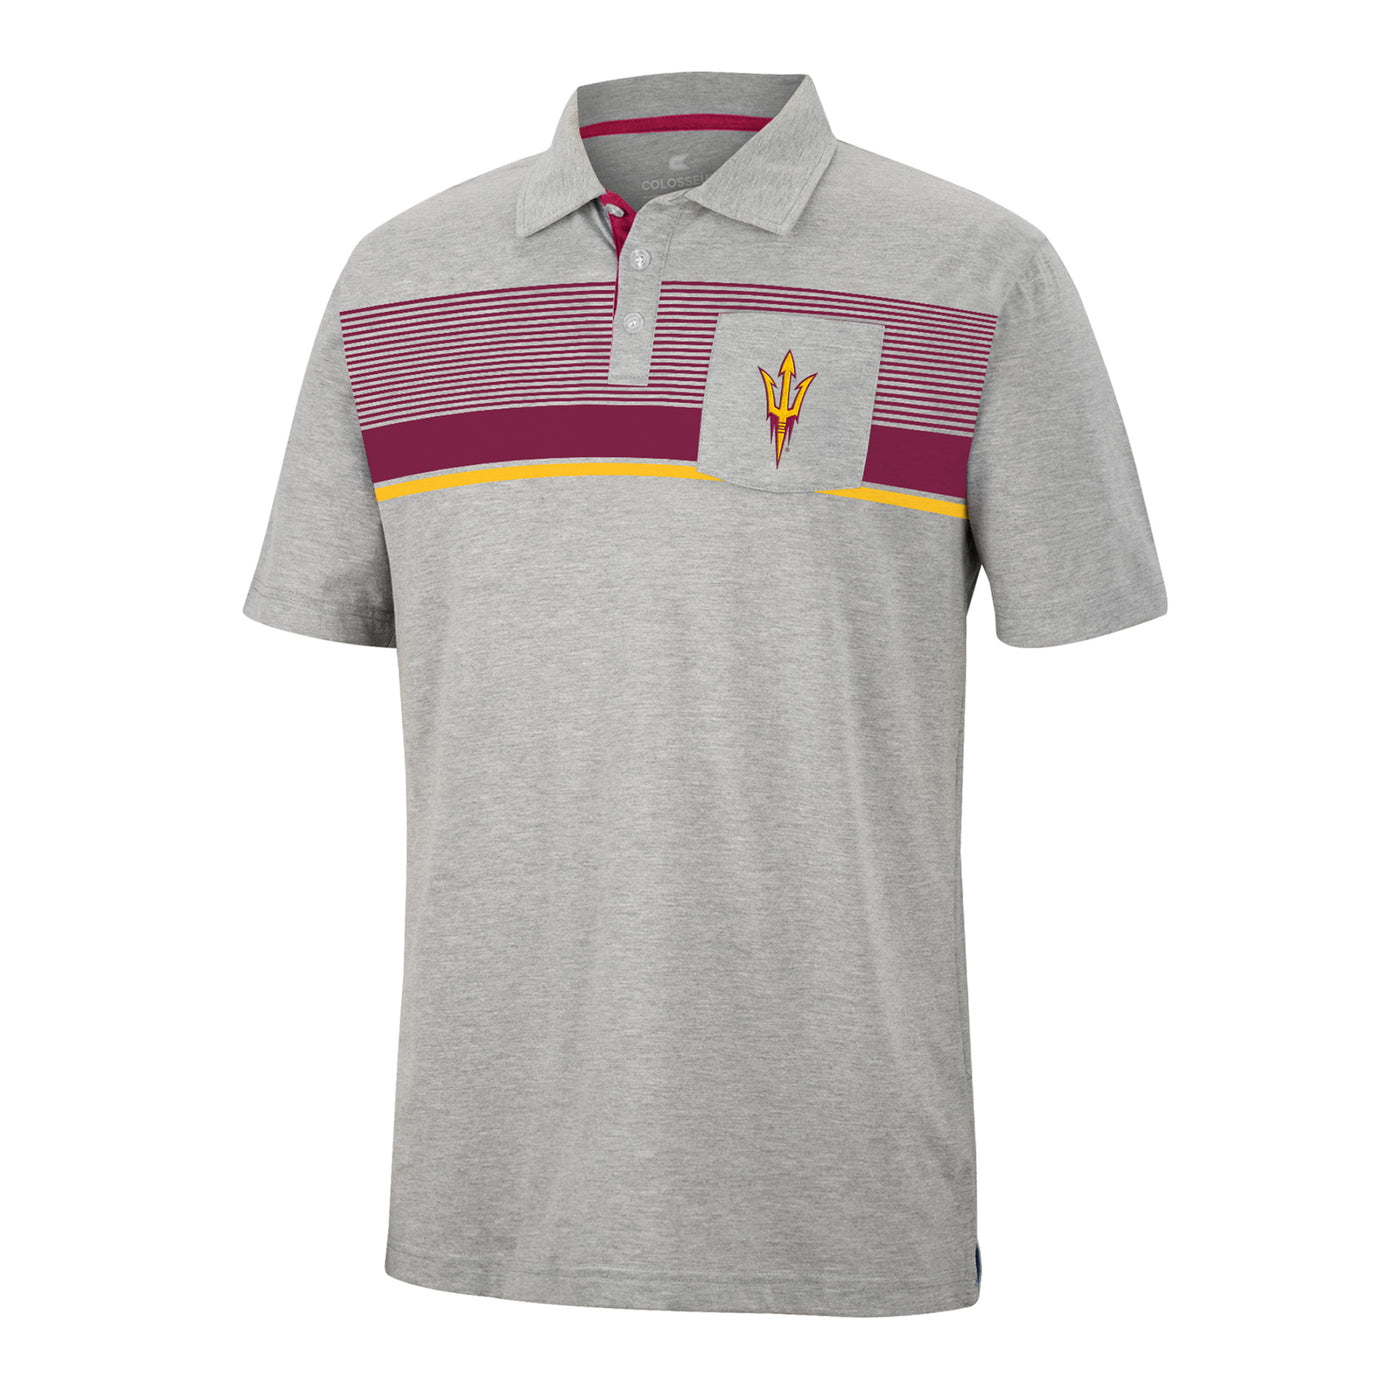 ASU gray polo with maroon stripes on chest under a gray pocket with a pitchfork on it